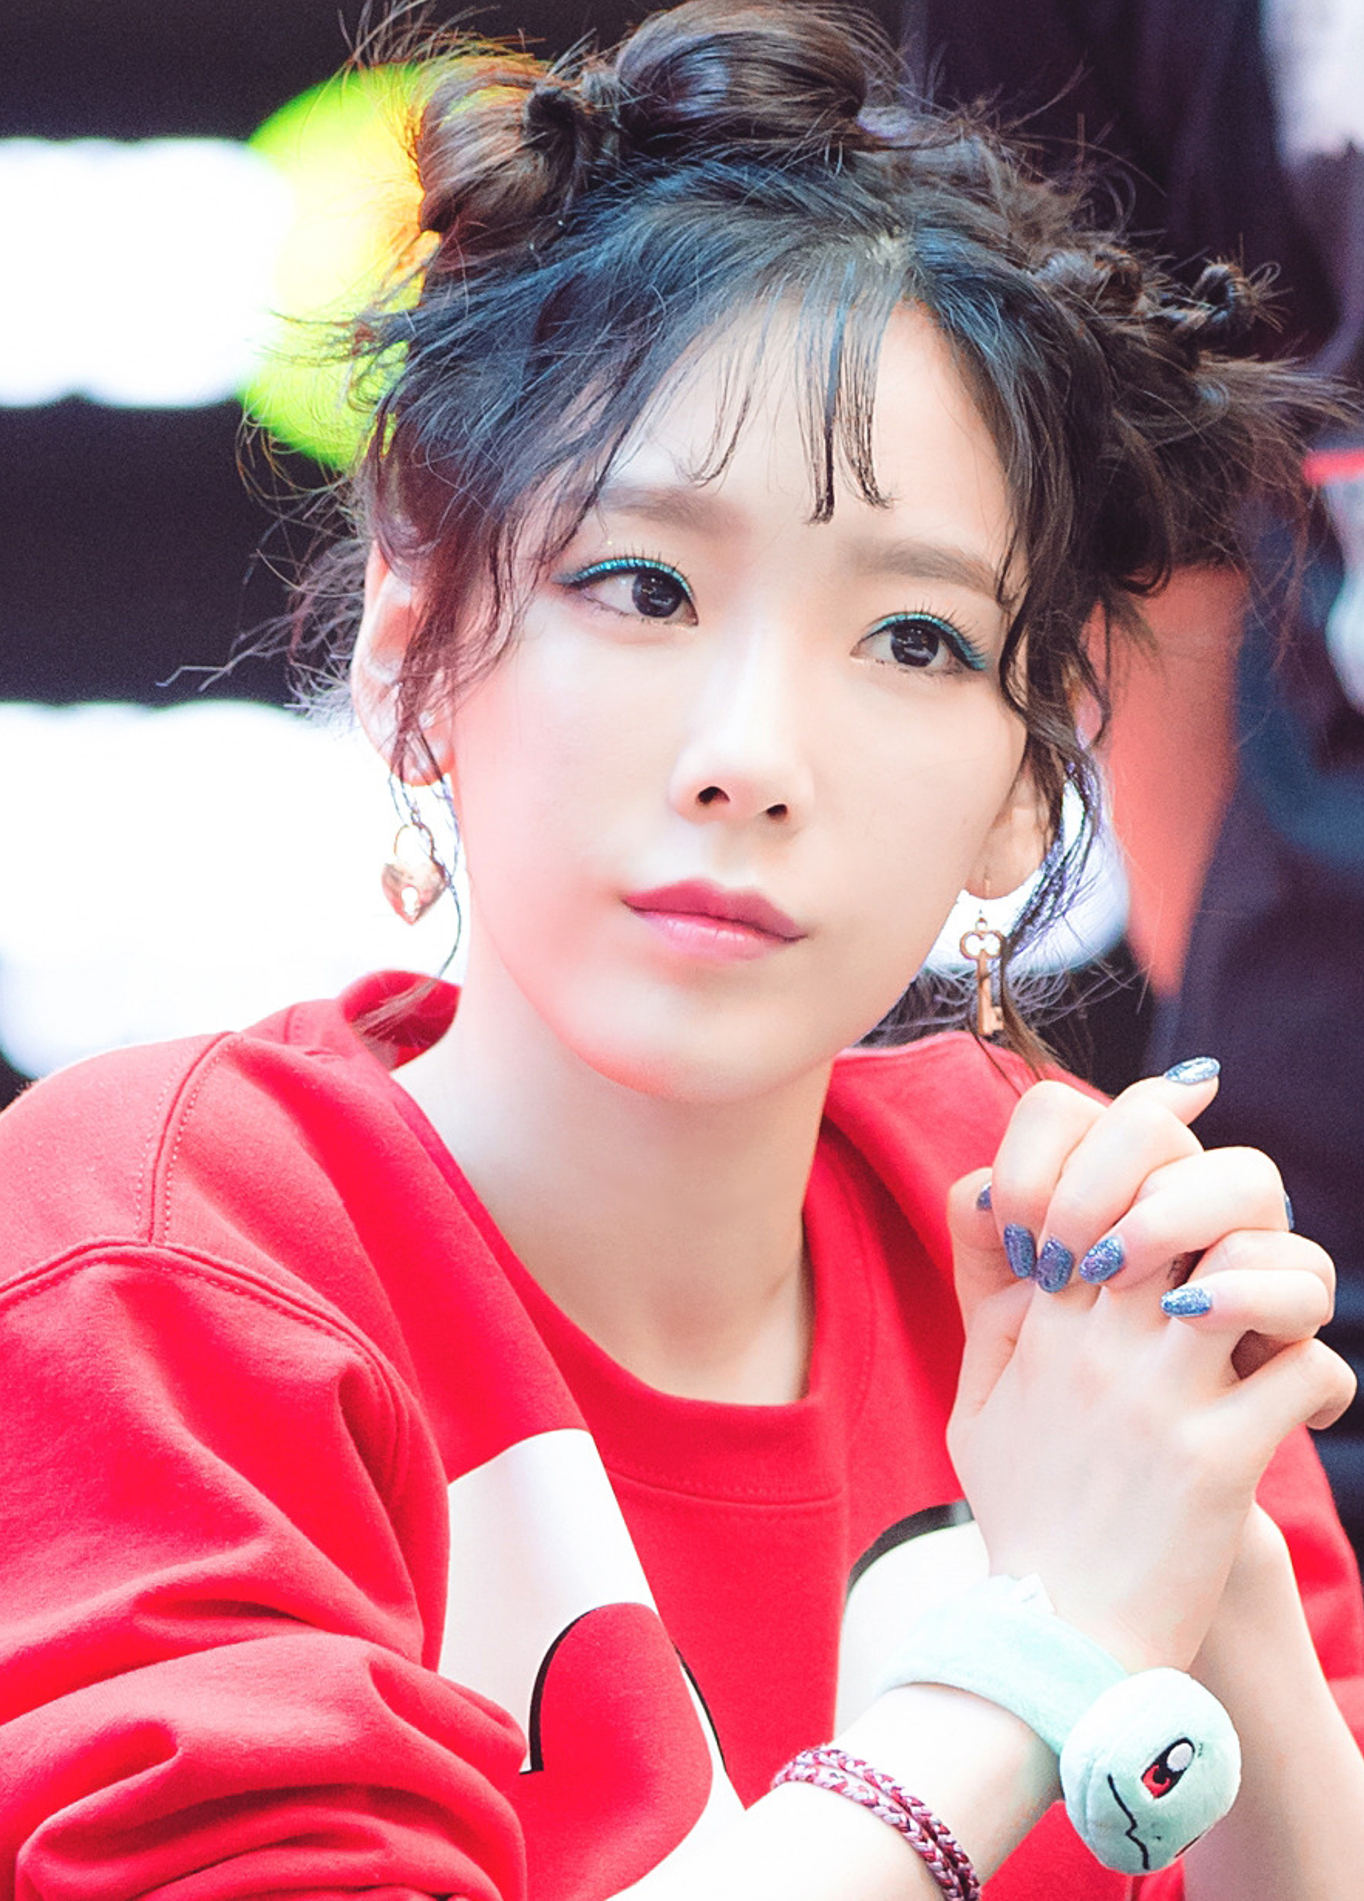 Kim Tae yeon at fansigning event on August 13 2017